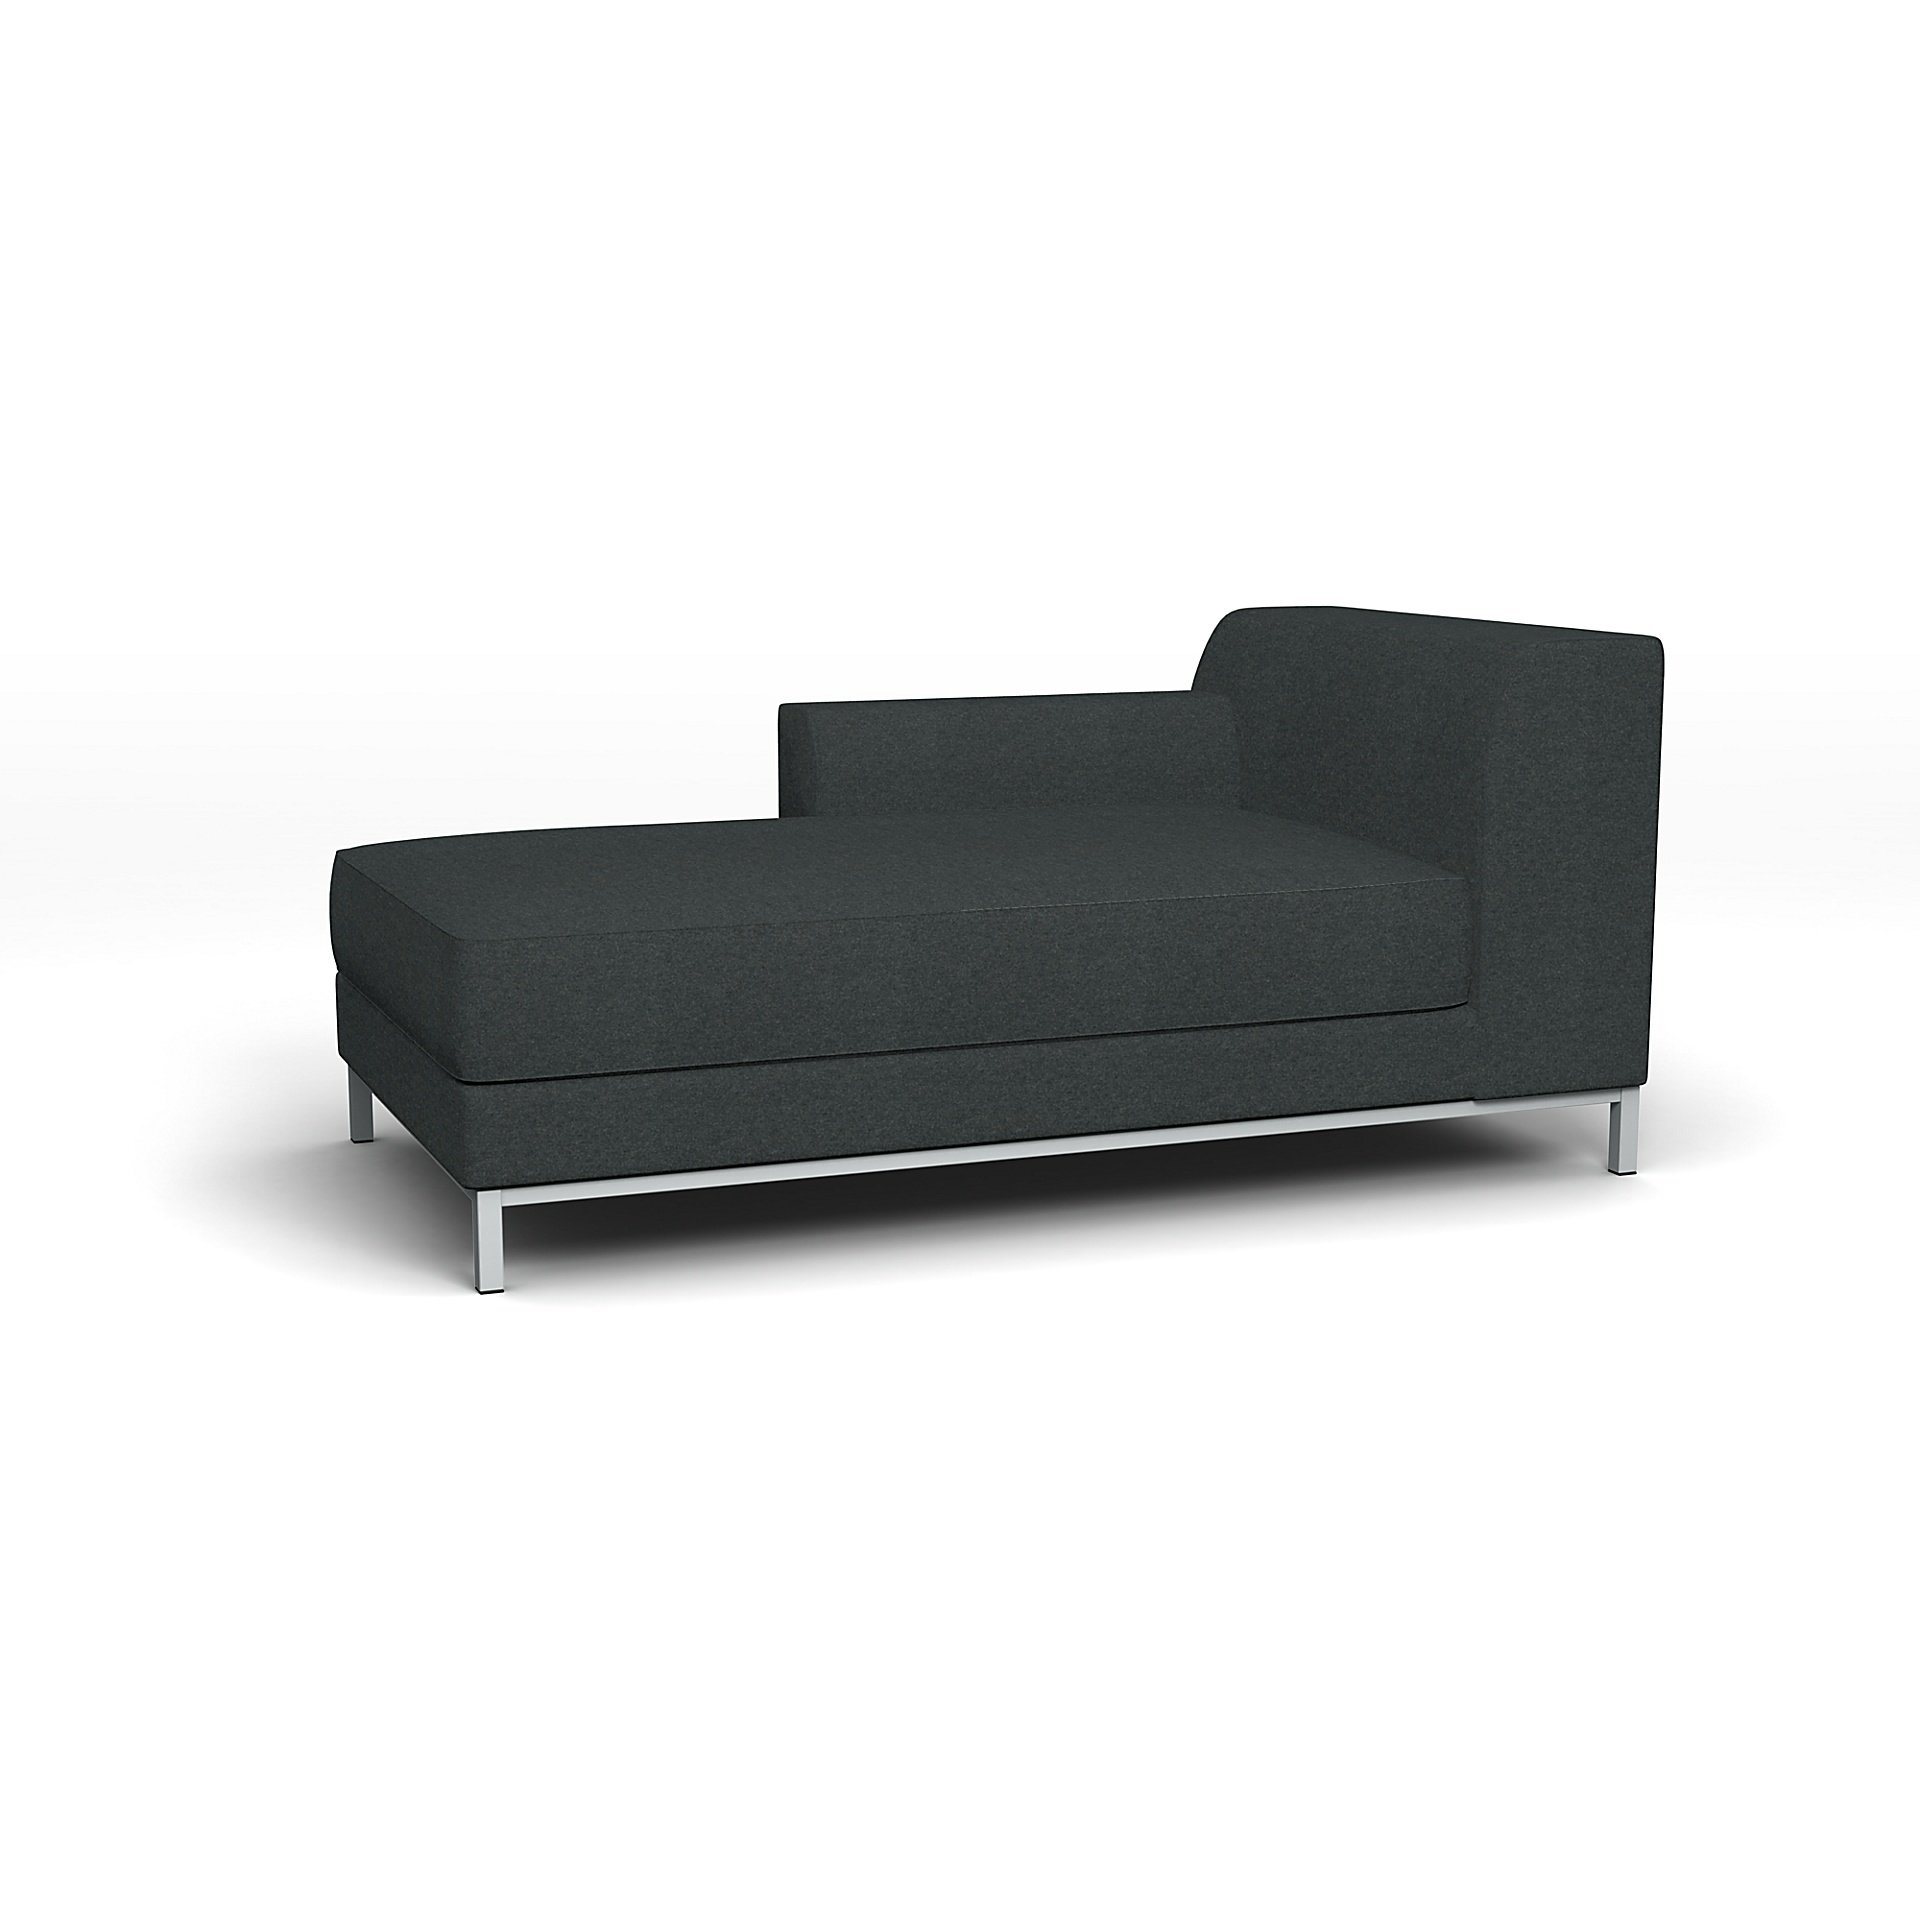 IKEA - Kramfors Chaise Longue with Left Arm Cover, Stone, Wool - Bemz